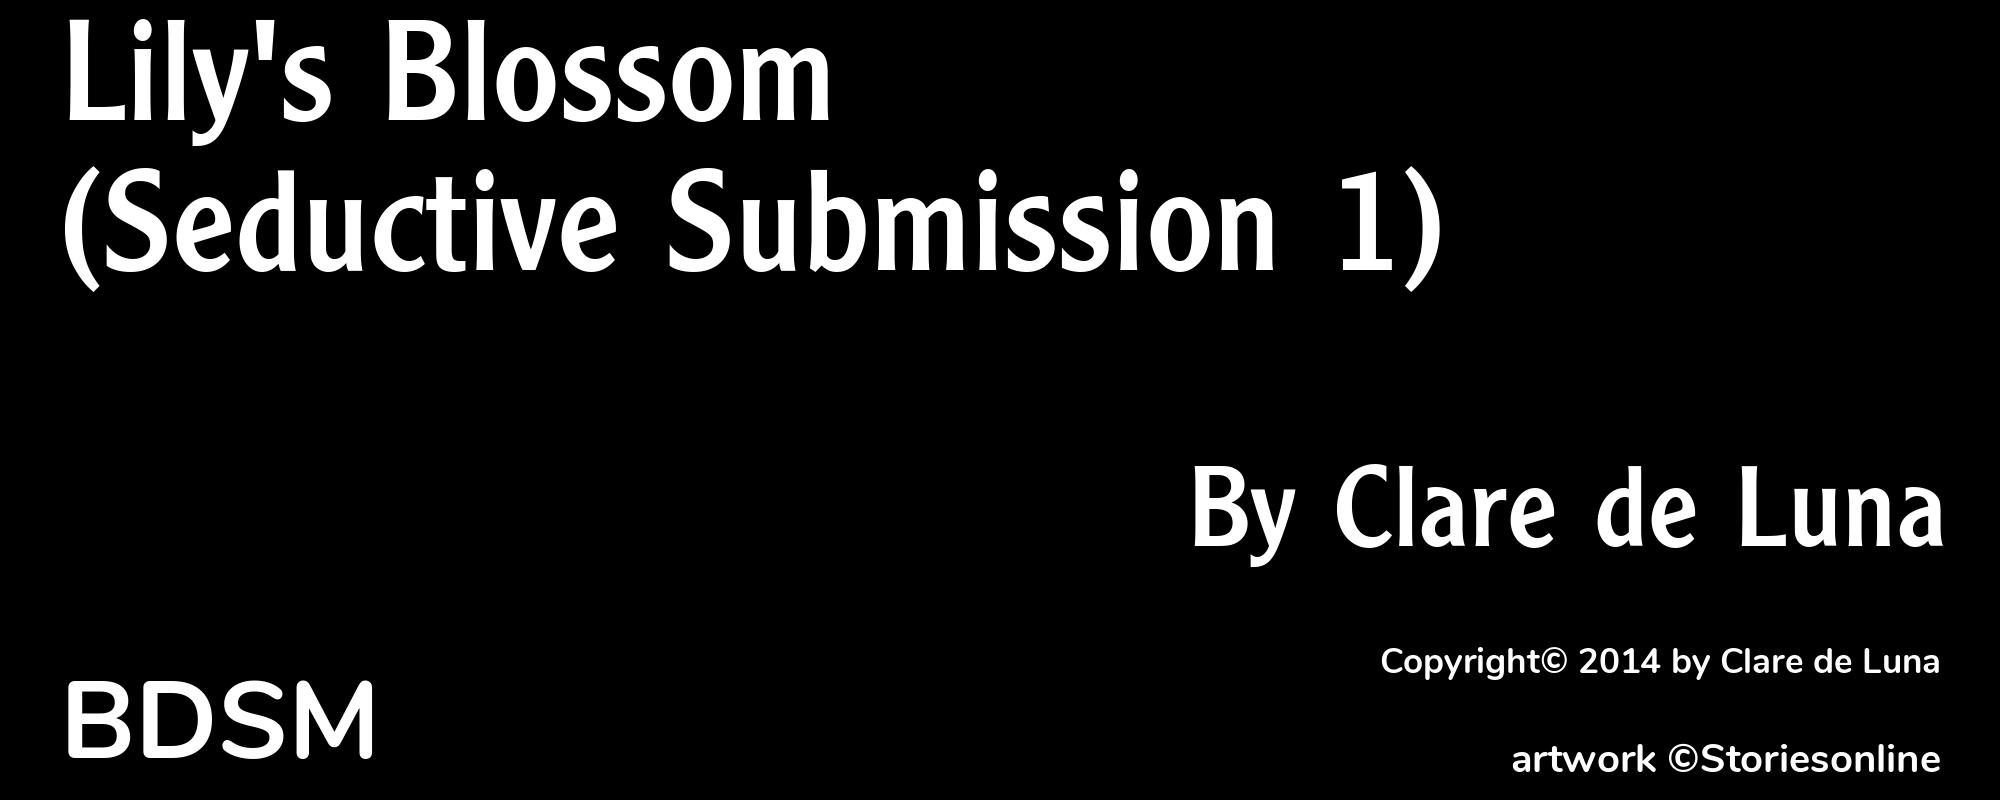 Lily's Blossom (Seductive Submission 1) - Cover